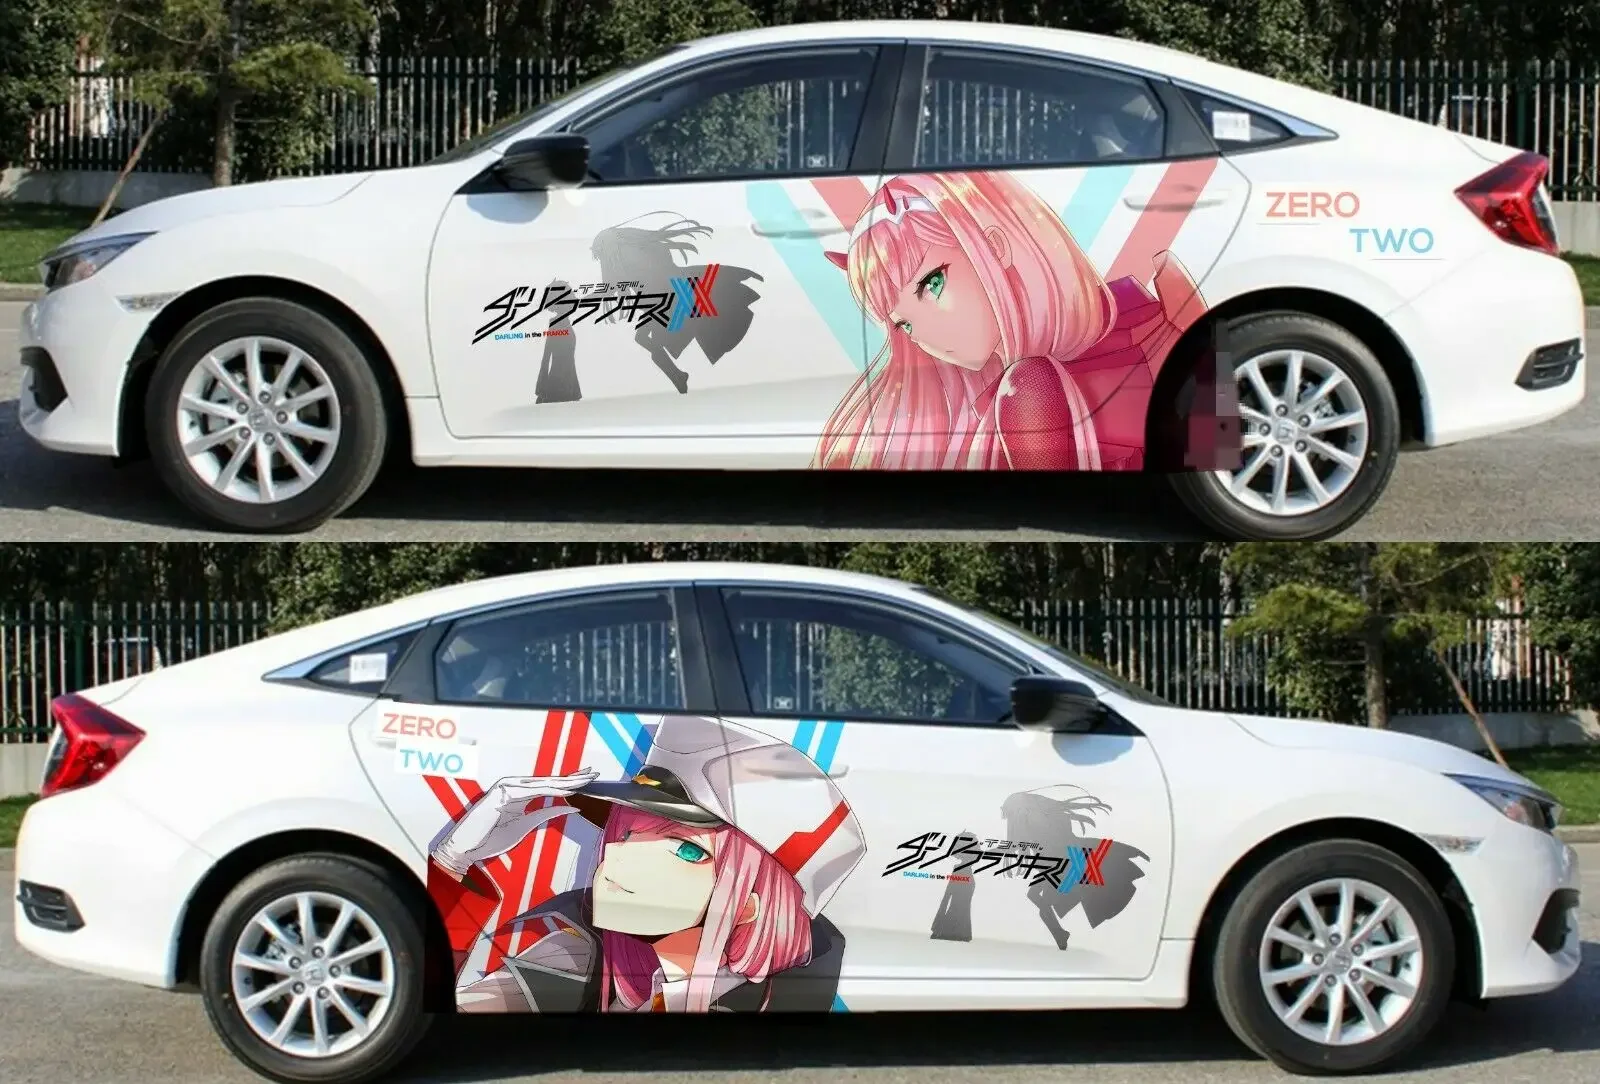 

DARLING in the FRANXX ZERO TWO Anime Car Door Decal Vinyl Sticker fit any car